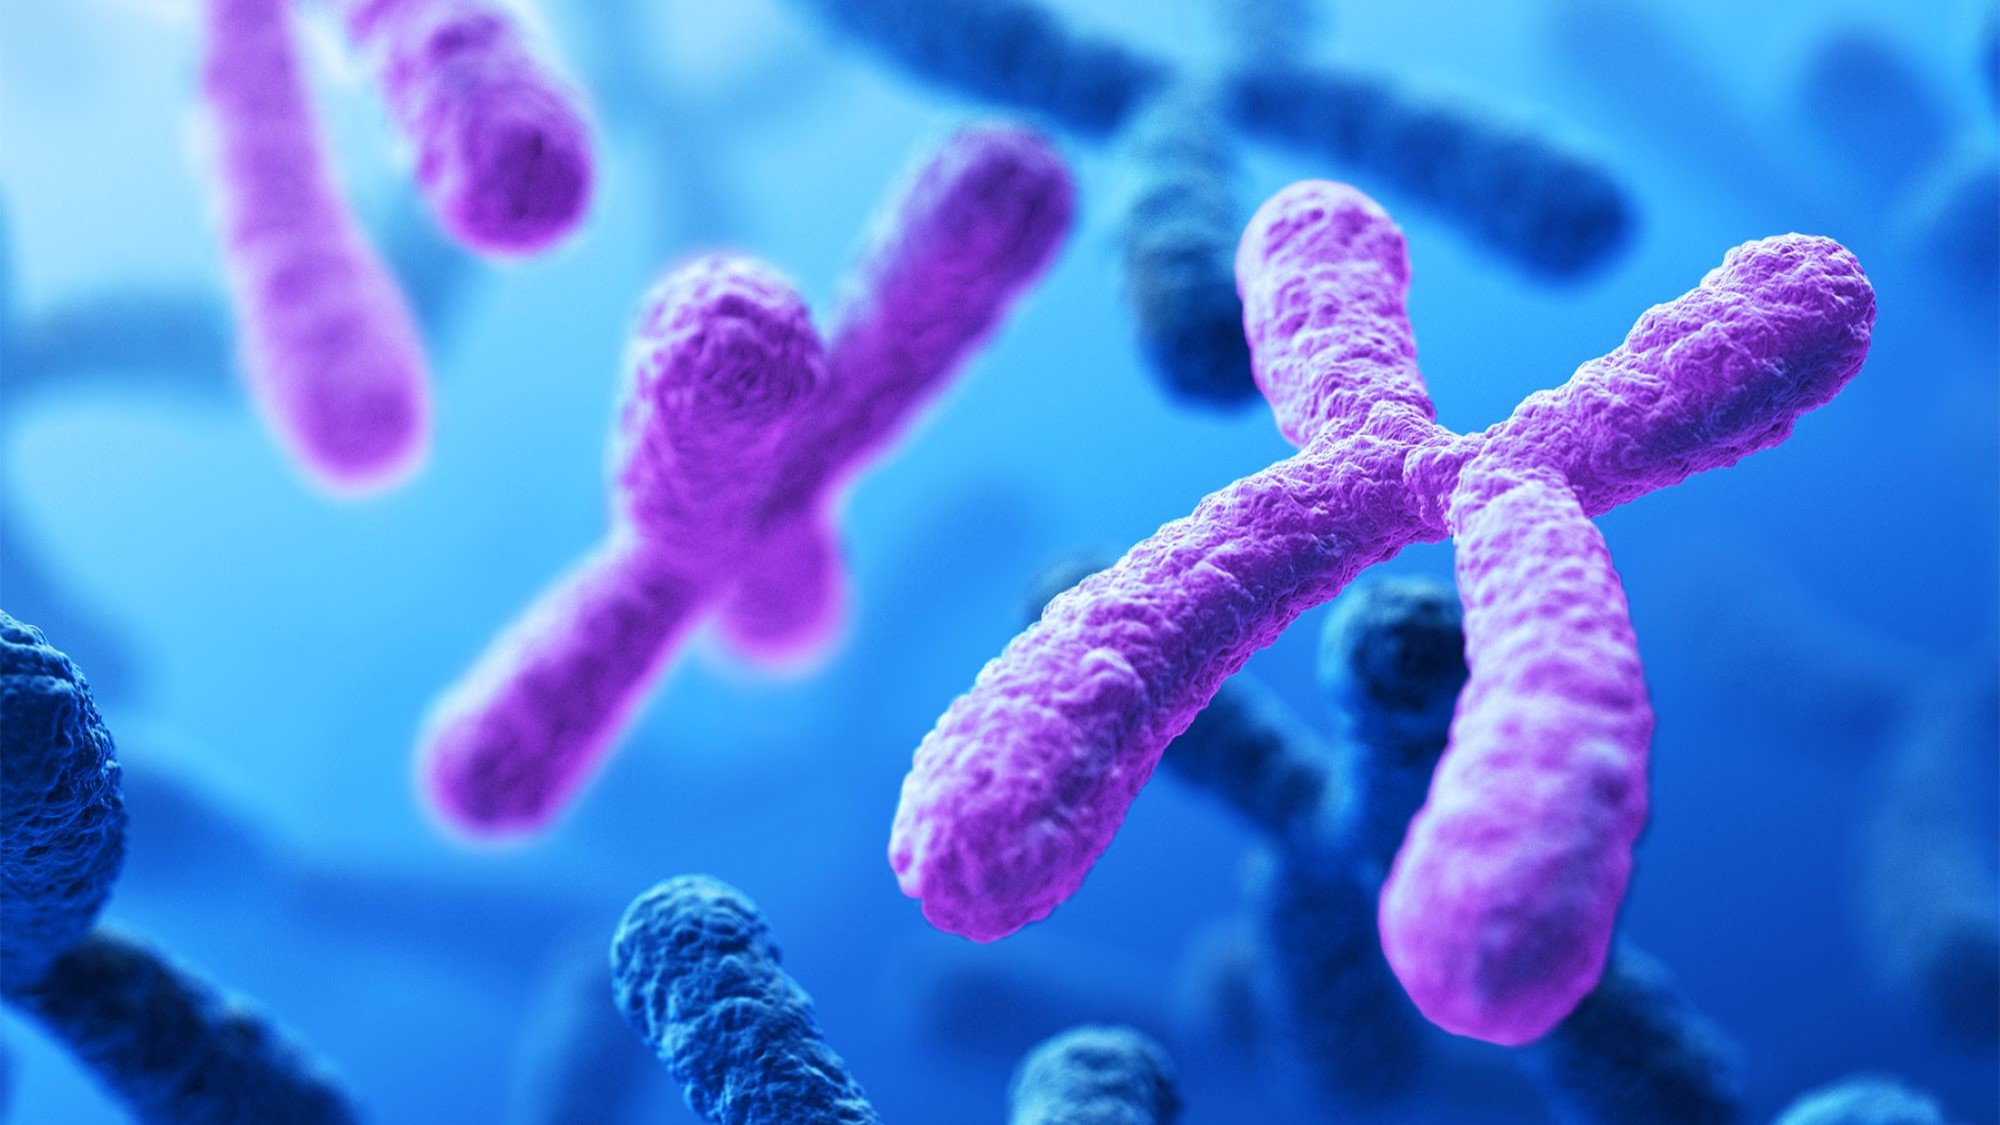 The final missing piece of the human genome has been decoded